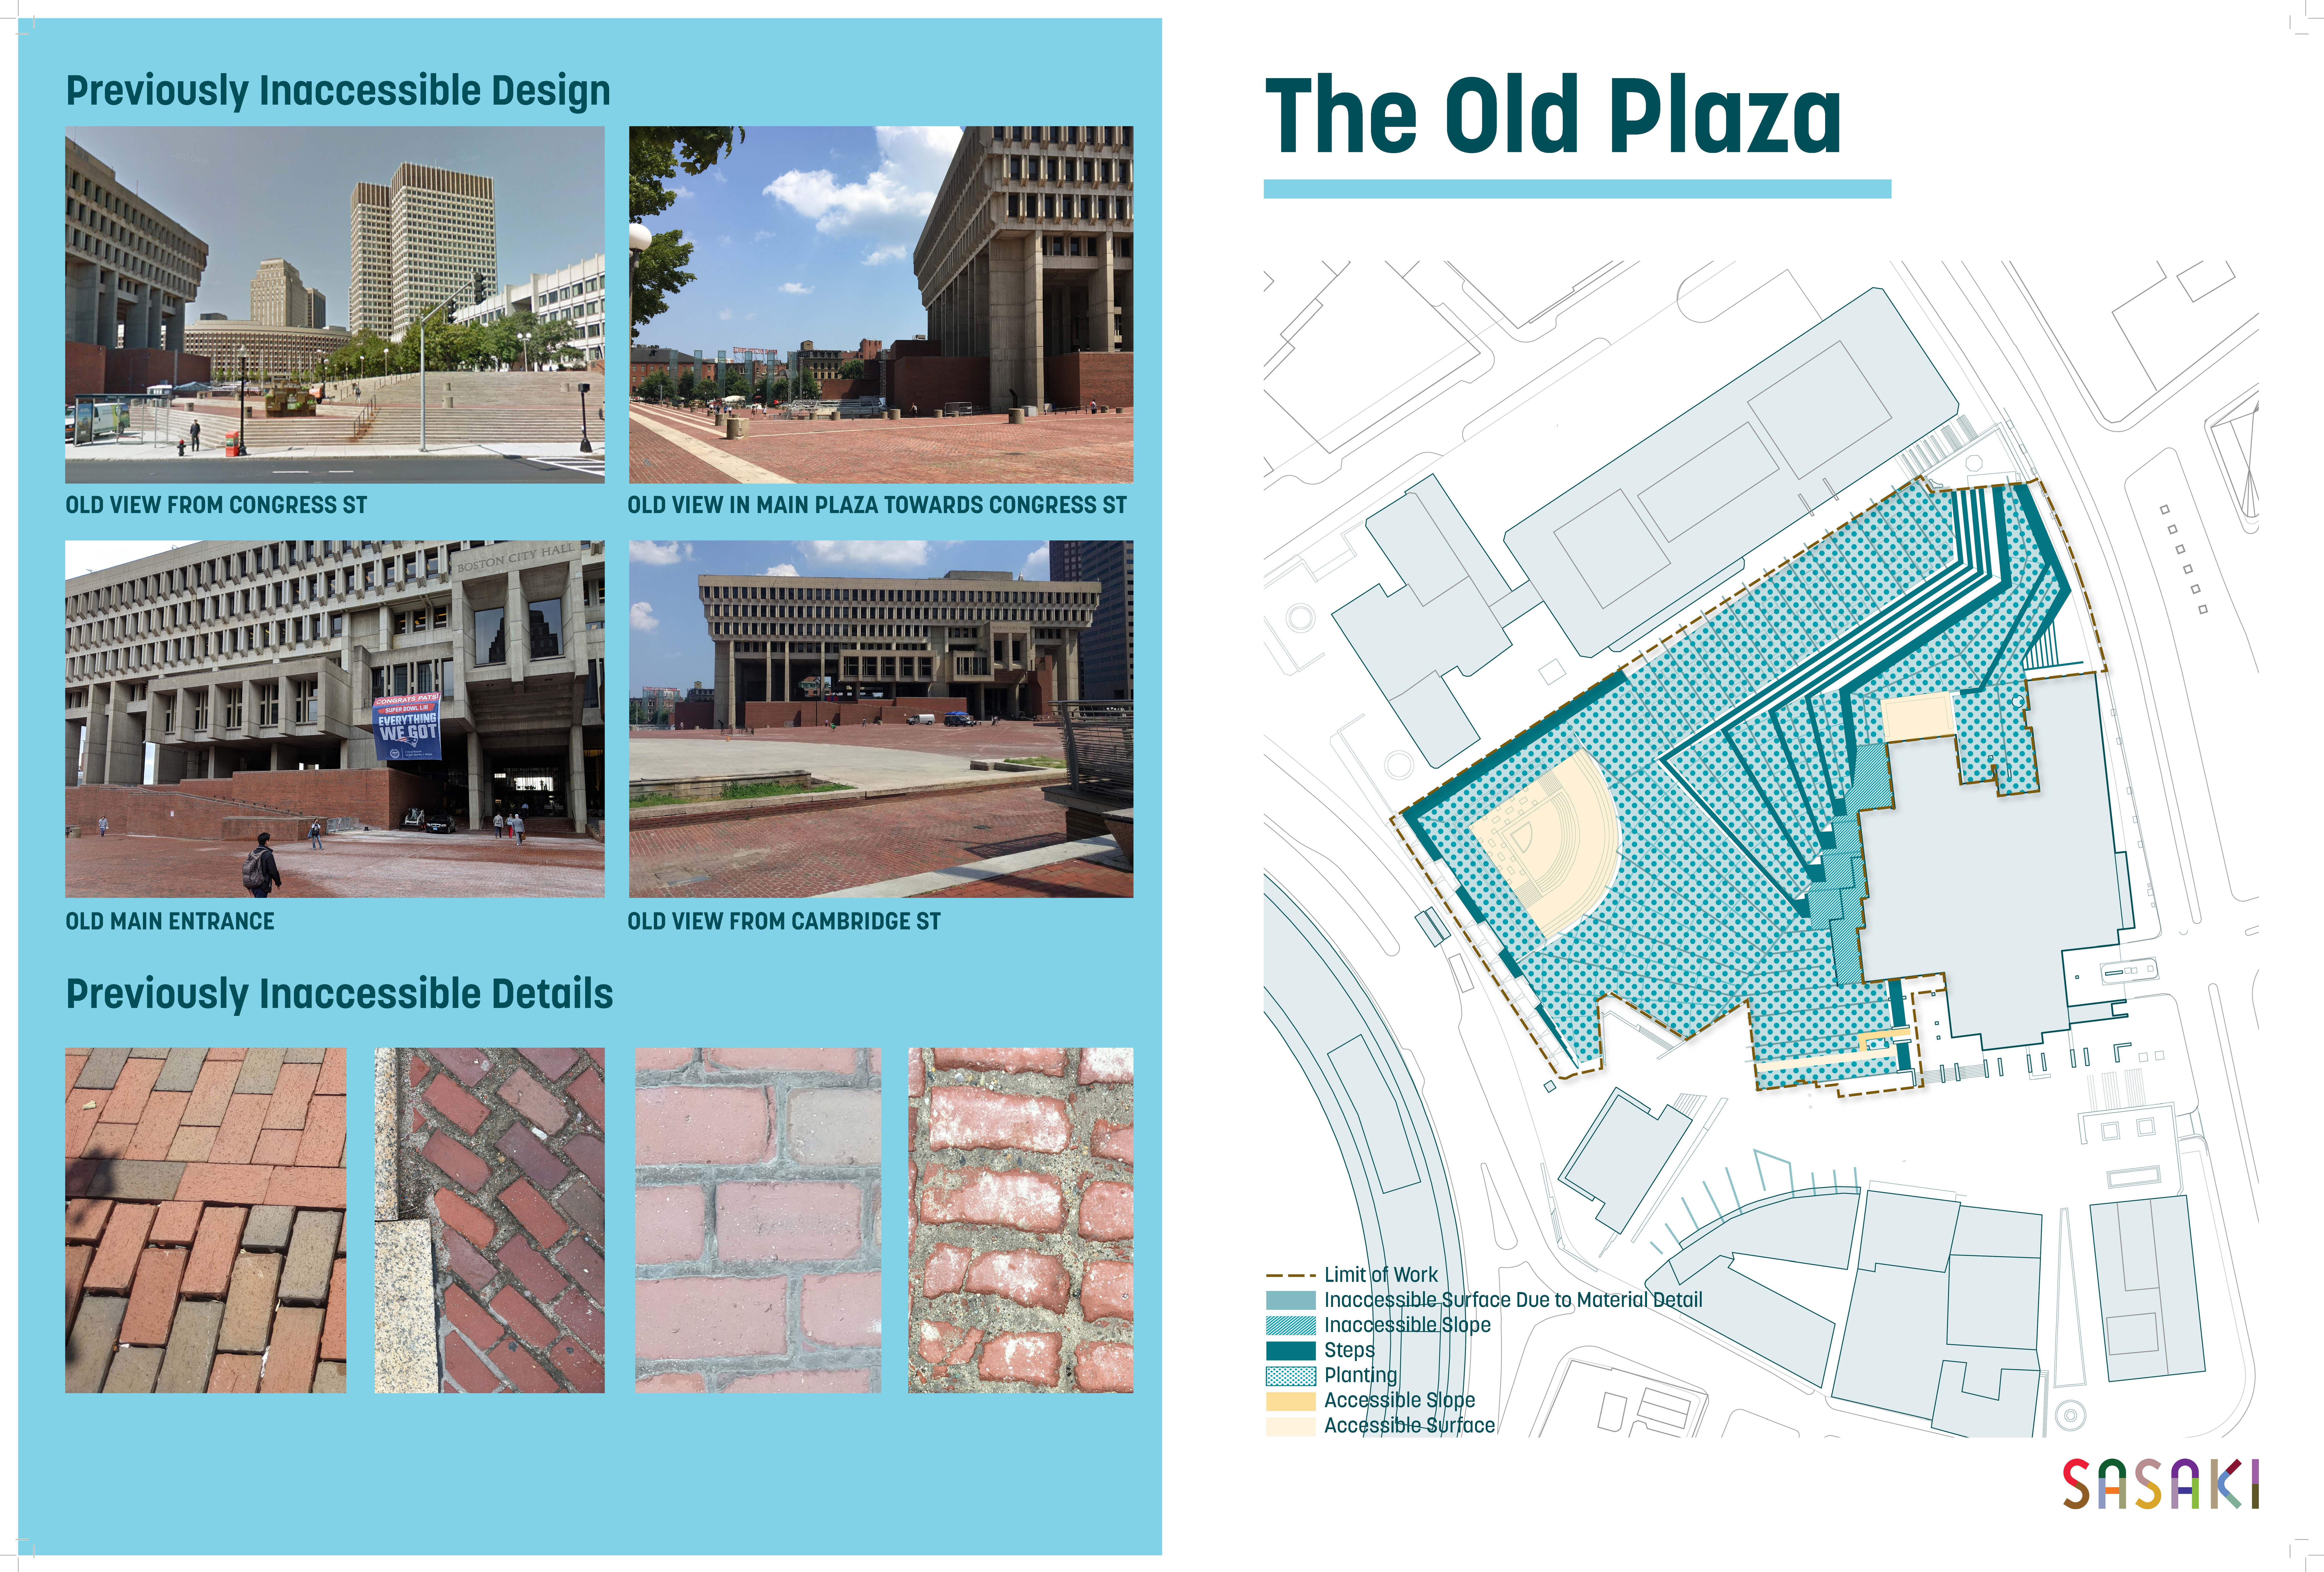 An informational graphic detailing the design features of the old Boston City Hall Plaza